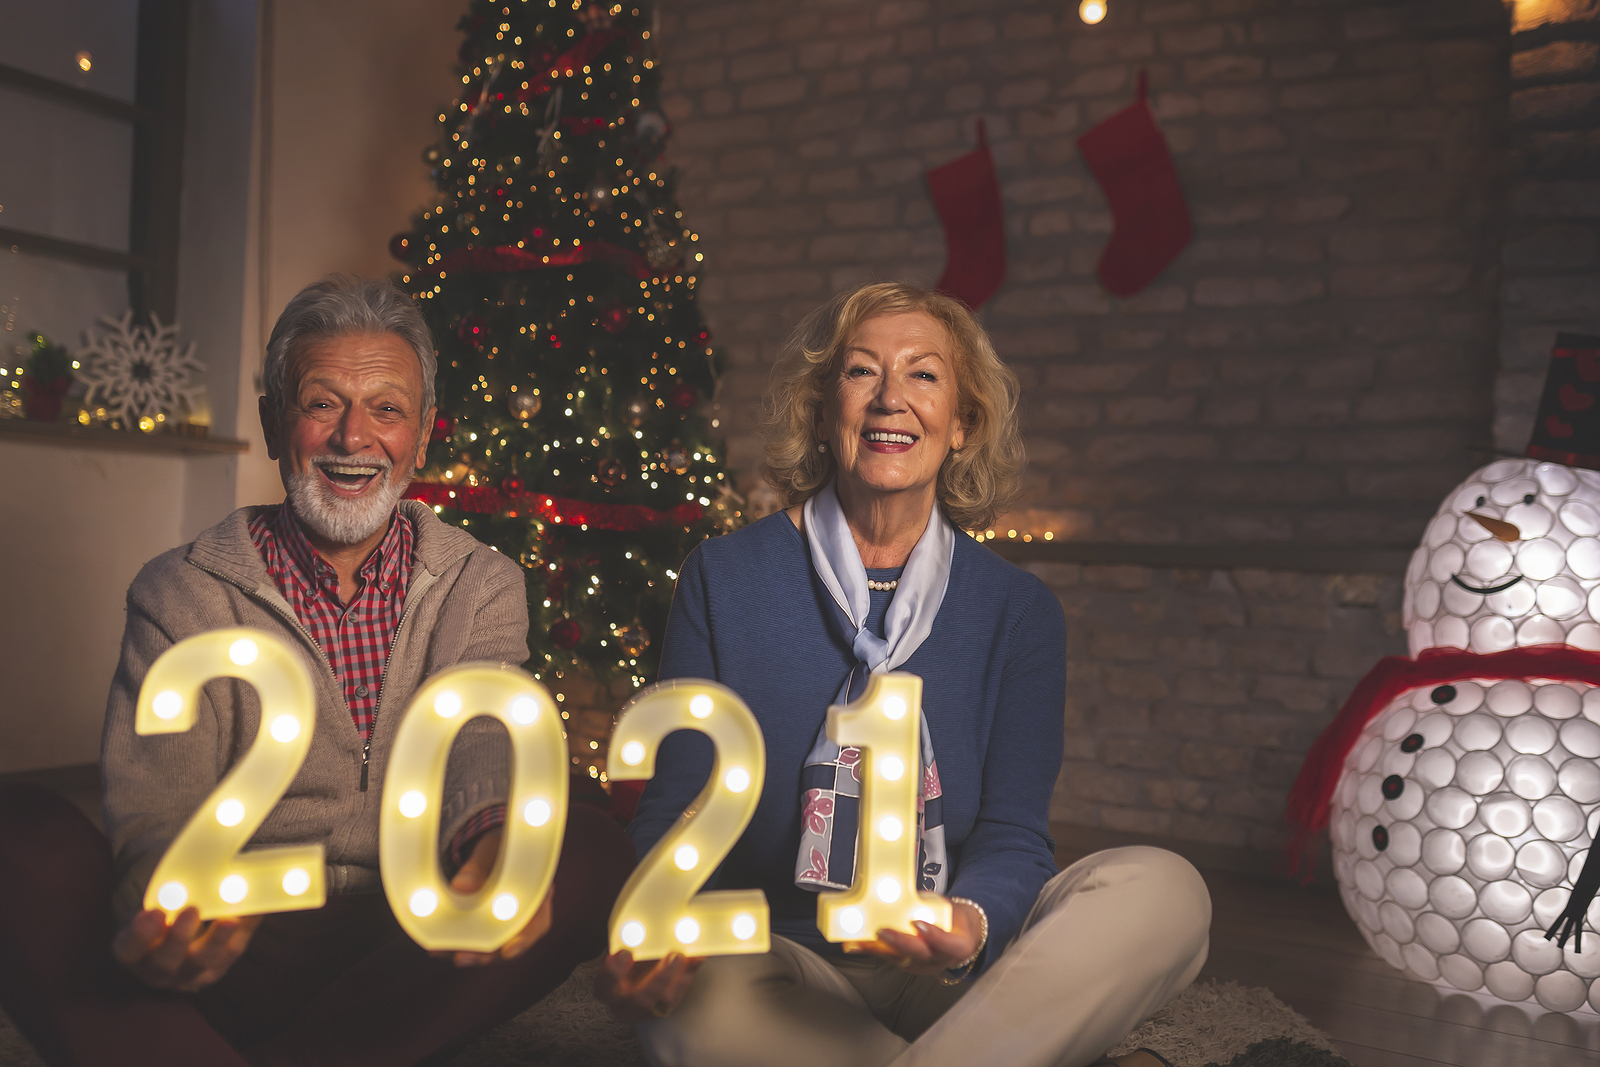 A senior couple pose for a photo in front of a Christmas tree while holding lighted plastic numbers for 2021.